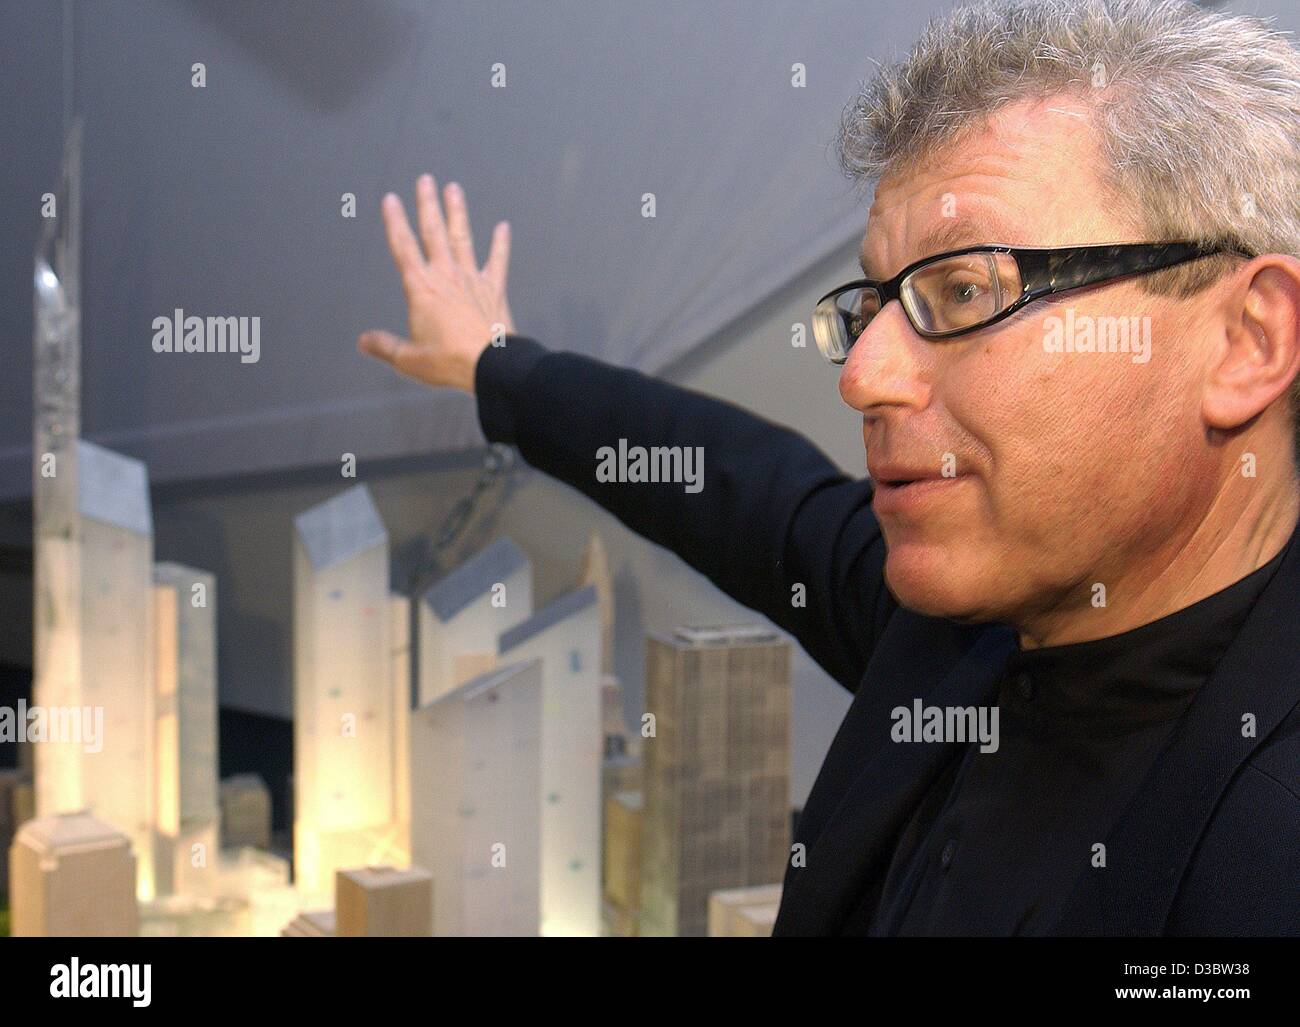 (dpa) - US architect Daniel Libeskind explains his model for a new design of Ground Zero, shown at the Jewish Museum in Berlin, 8 September 2003. Libeskind, whose design for the new centre won a competition earlier this year, said he didn't want to make substancial compromises on his original plans. Stock Photo